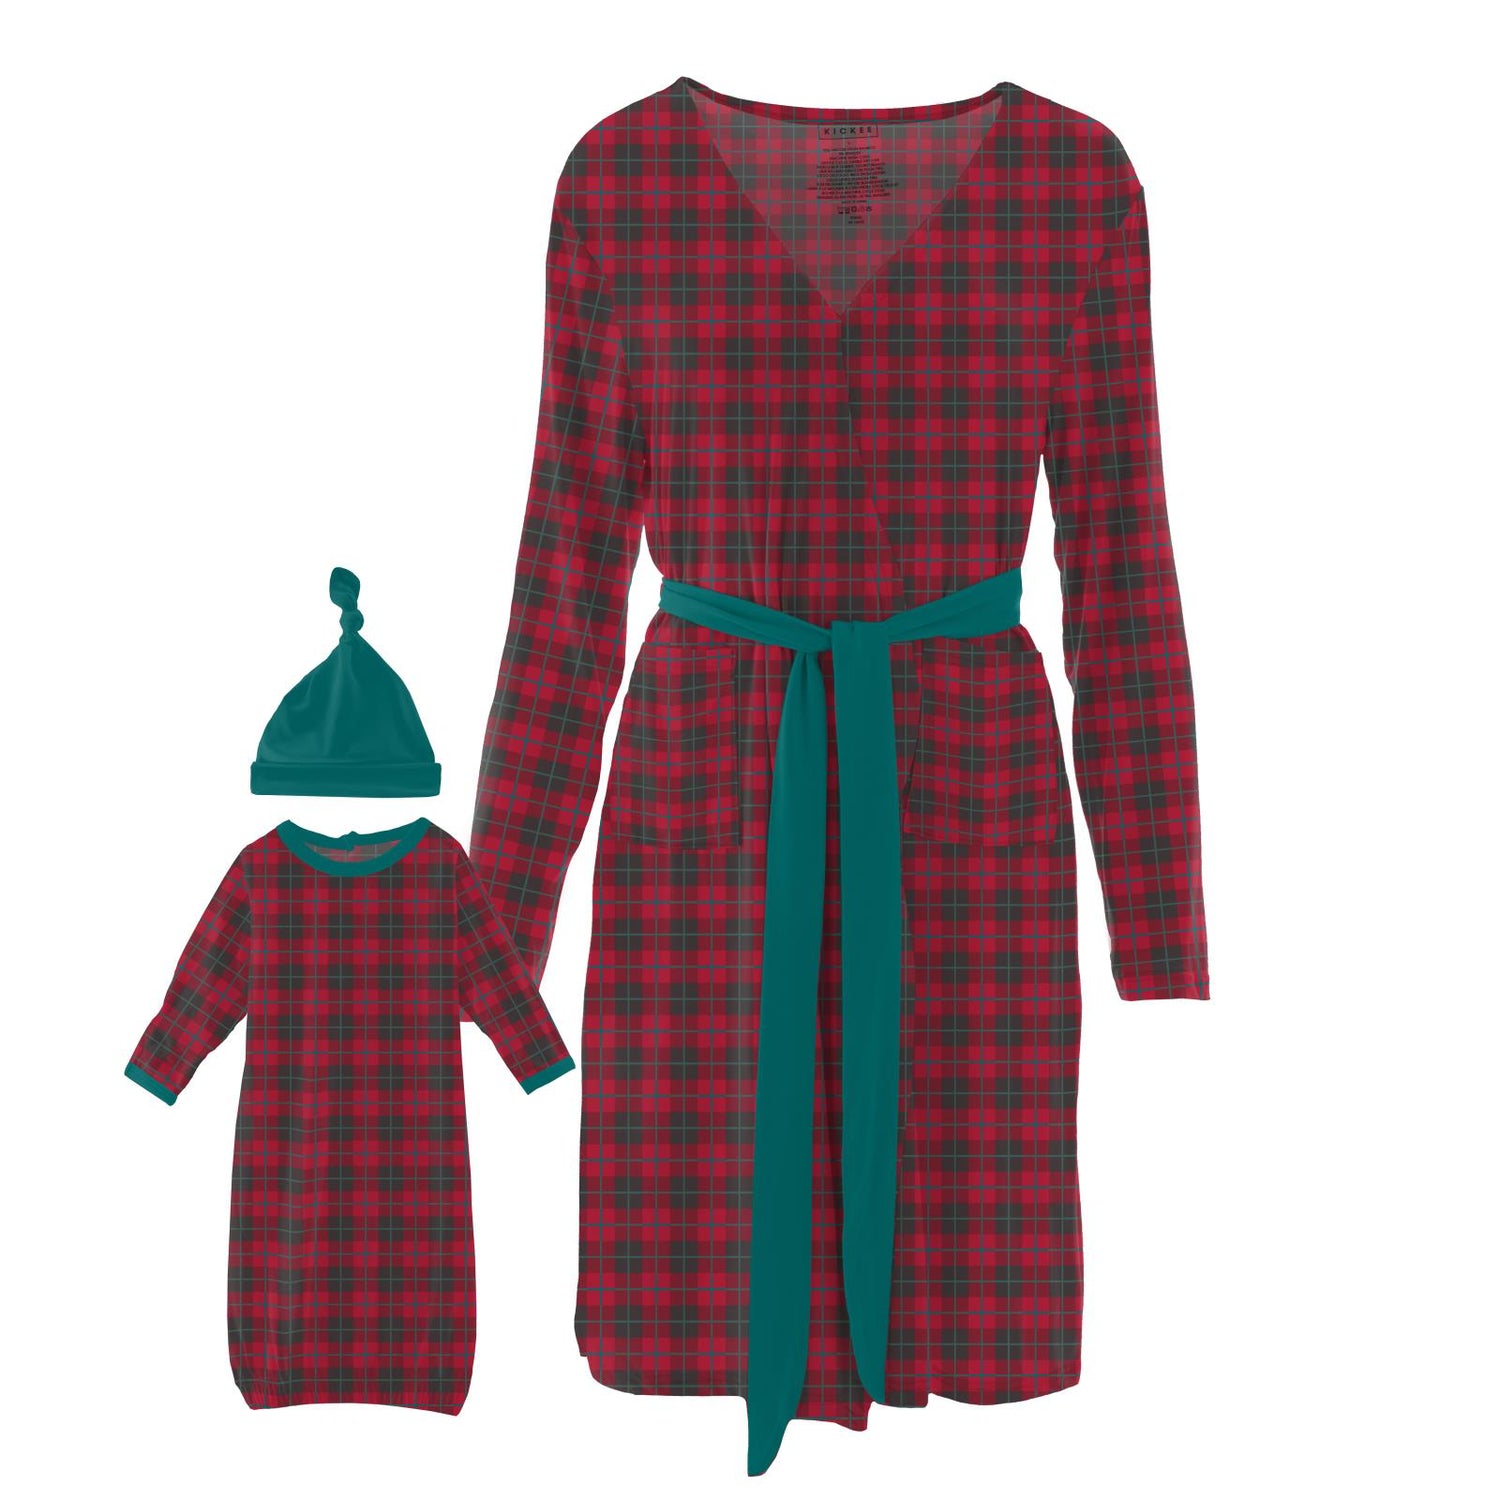 Women's Print Mid Length Lounge Robe & Layette Gown Set in Anniversary Plaid